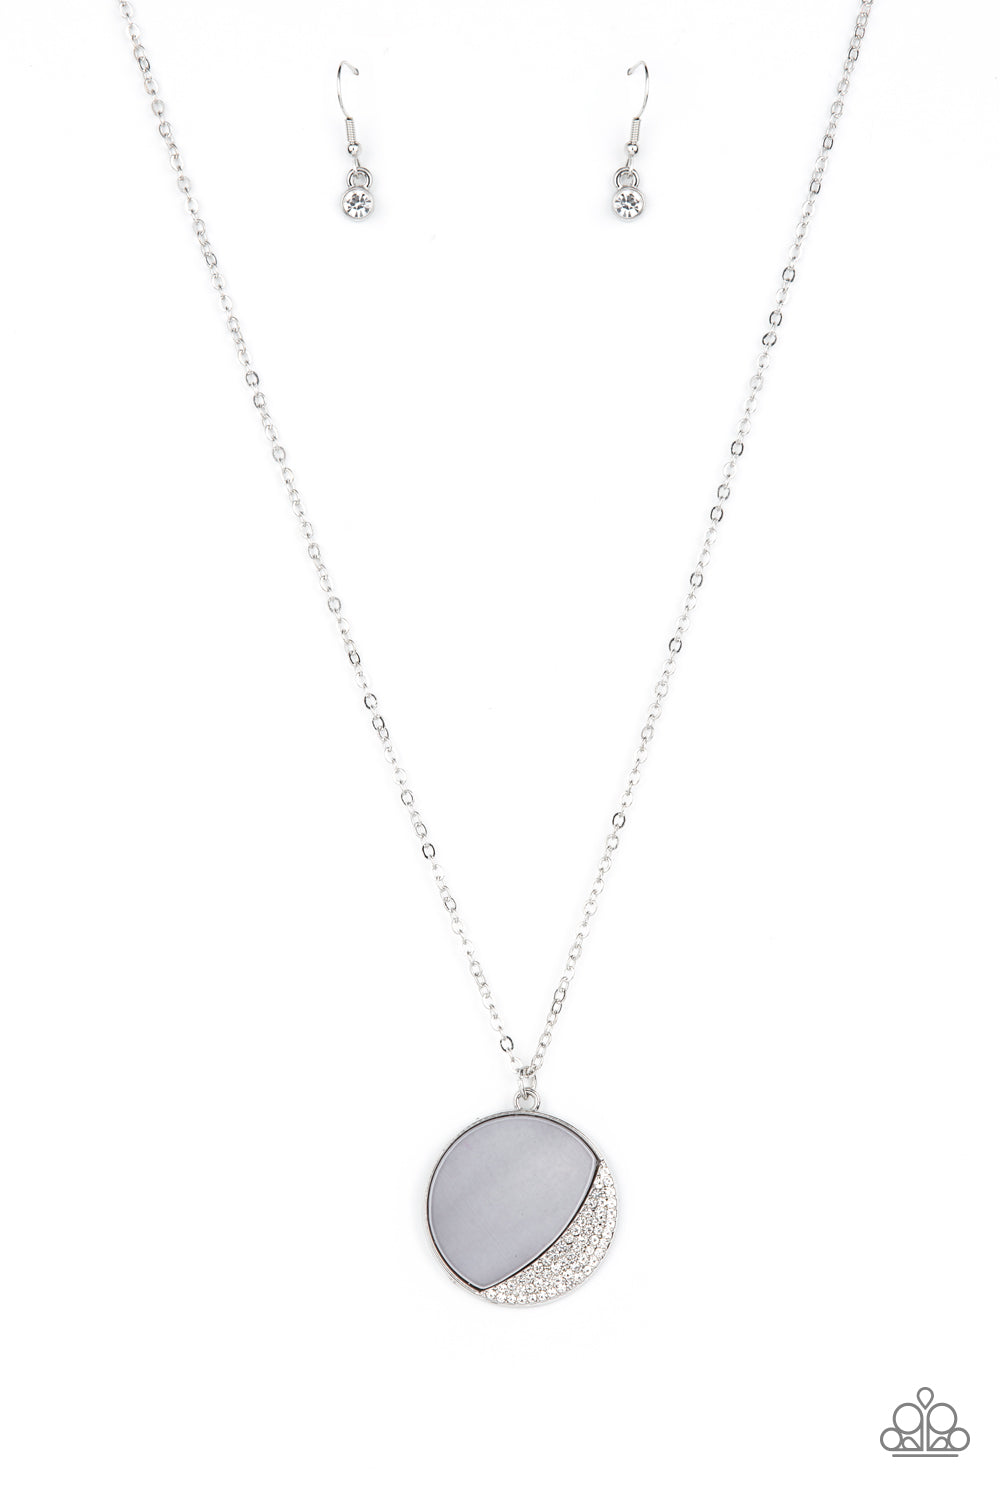 Oceanic Eclipse Silver Necklace - Paparazzi Accessories  An Ultimate Gray shell-like pendant is eclipsed in a half moon silver frame that is encrusted in sparkly white rhinestones, creating a shimmery display below the collar. Features an adjustable clasp closure.  Sold as one individual necklace. Includes one pair of matching earrings.